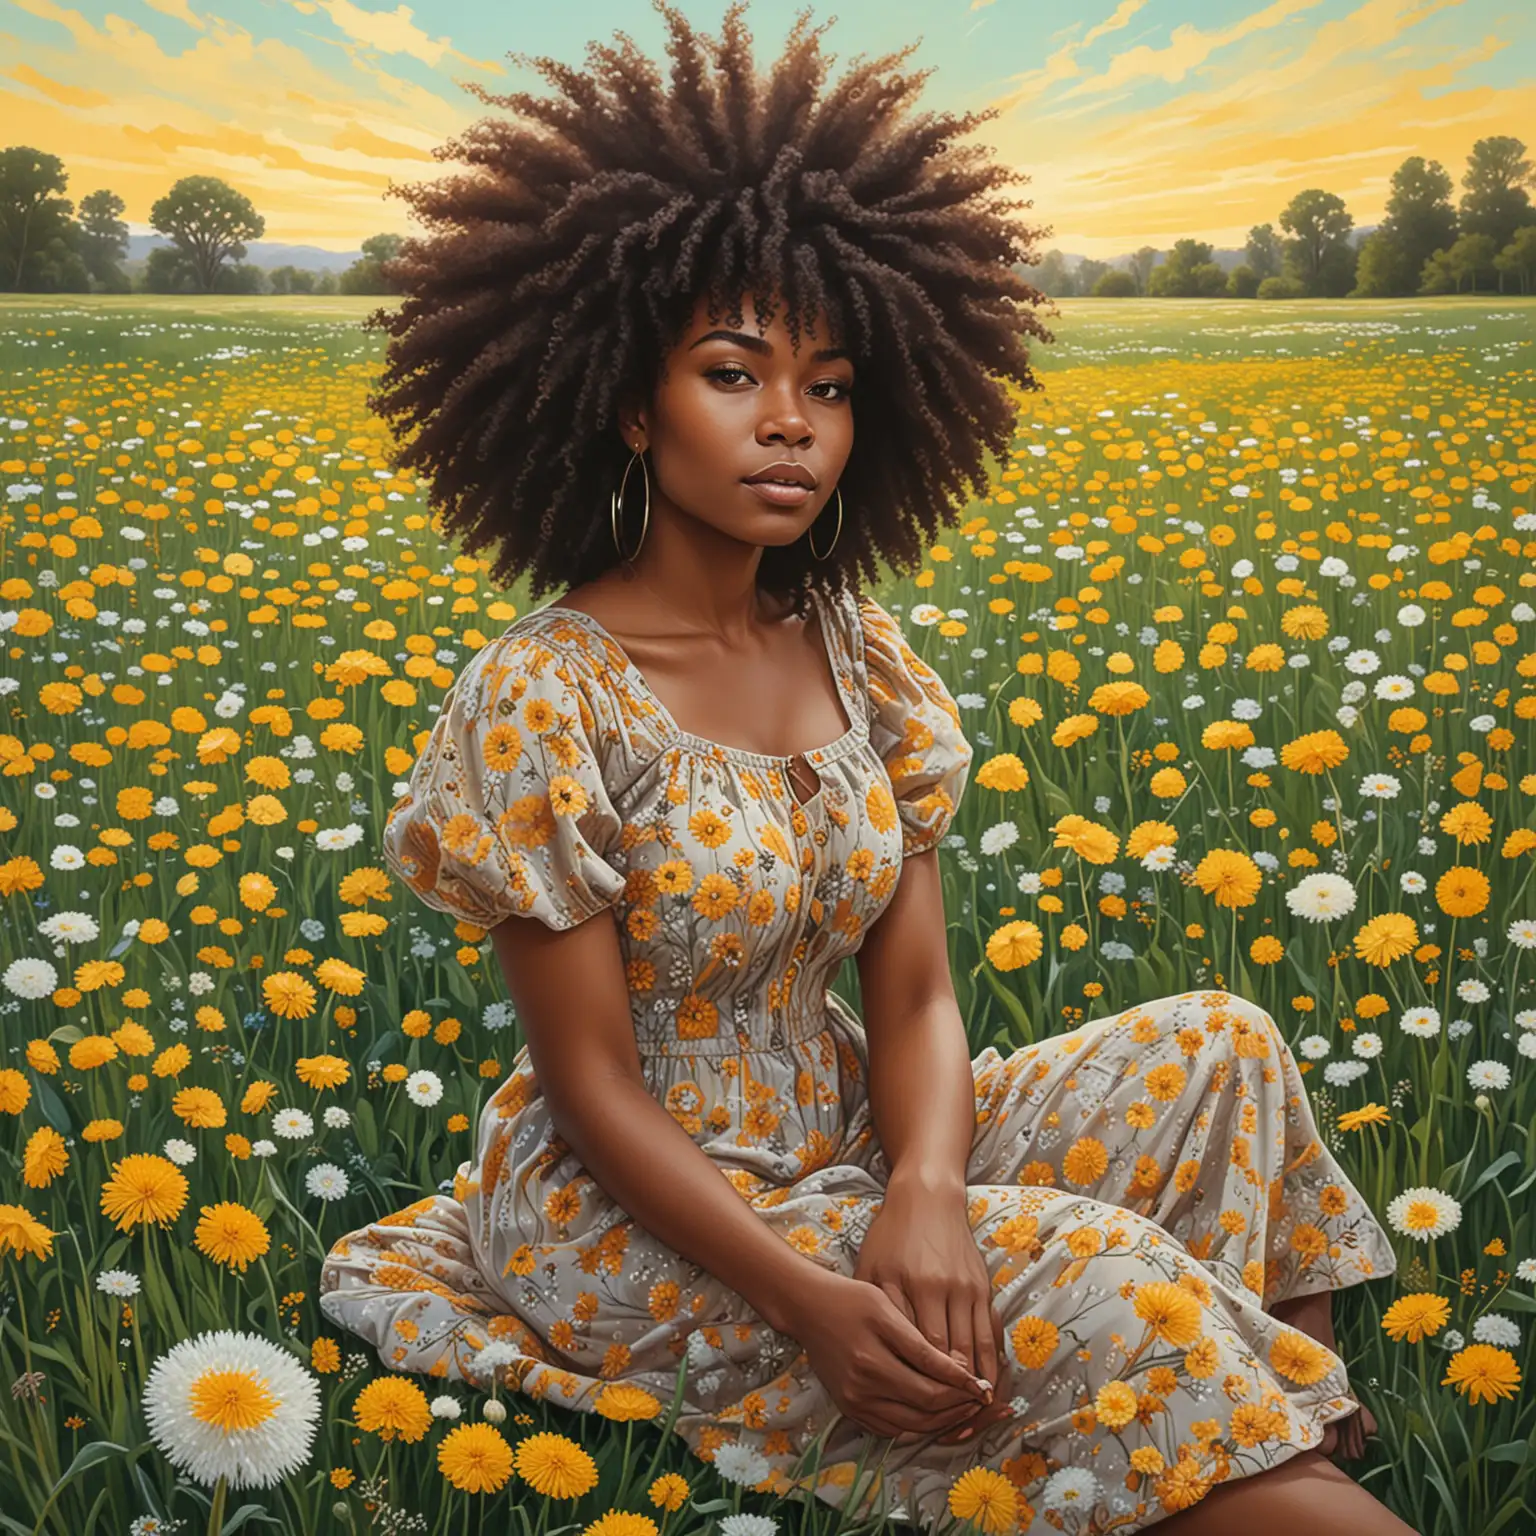 Goddess of Nature Woman with Flower Afro in Dandelion Field